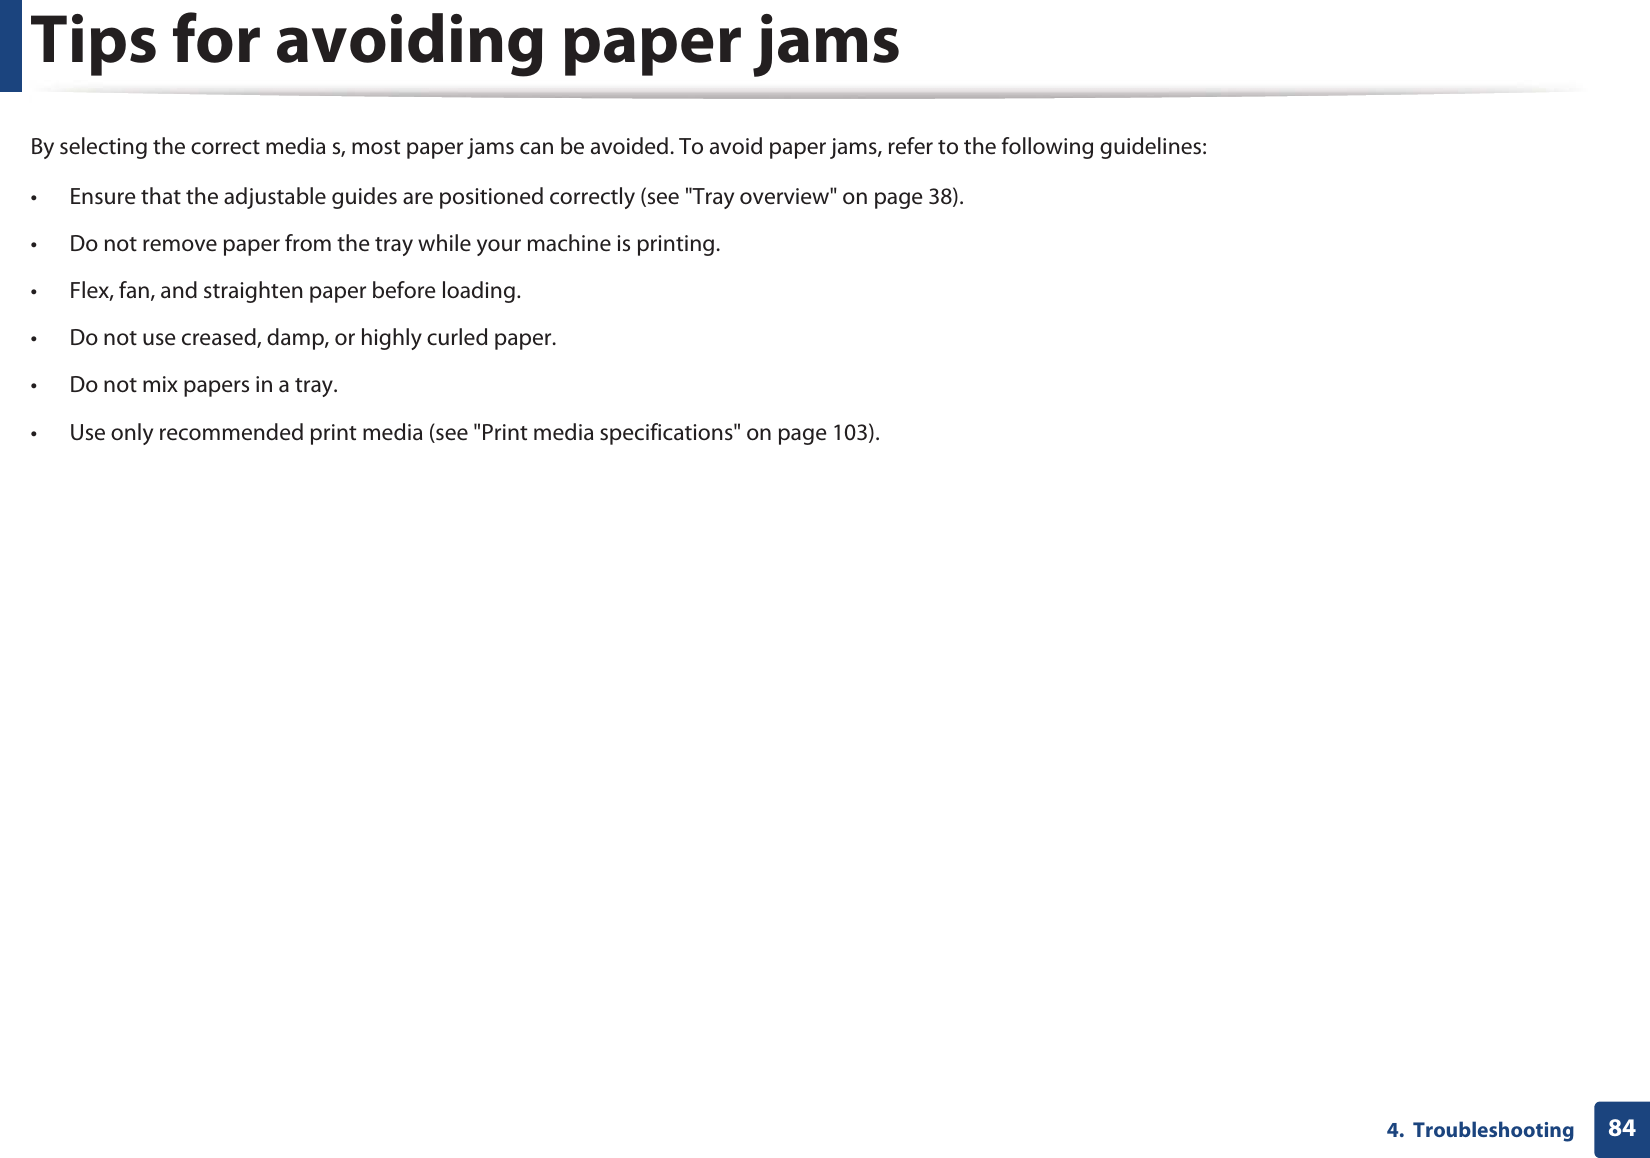 844.  TroubleshootingTips for avoiding paper jamsBy selecting the correct media s, most paper jams can be avoided. To avoid paper jams, refer to the following guidelines:• Ensure that the adjustable guides are positioned correctly (see &quot;Tray overview&quot; on page 38).• Do not remove paper from the tray while your machine is printing.• Flex, fan, and straighten paper before loading. • Do not use creased, damp, or highly curled paper.• Do not mix papers in a tray.• Use only recommended print media (see &quot;Print media specifications&quot; on page 103).